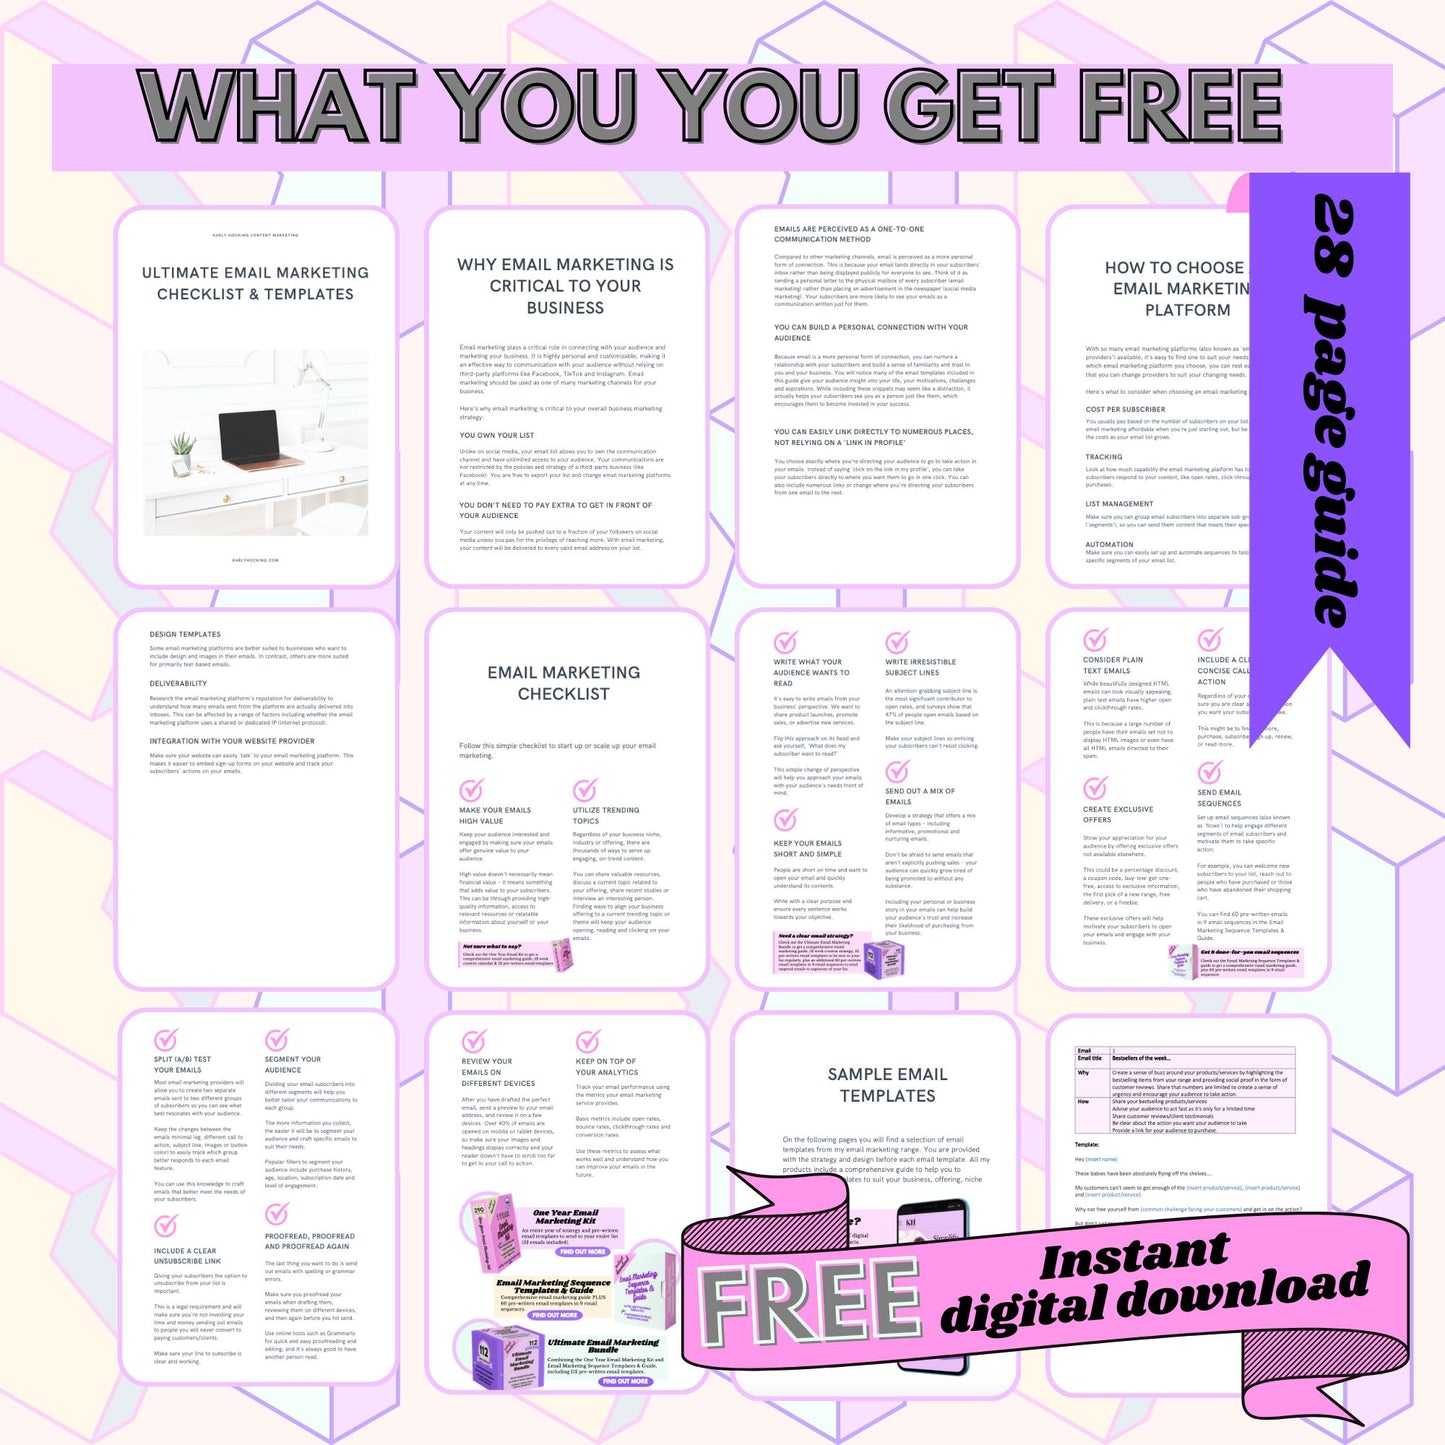 FREE Email Marketing Checklist & Templates - Instant download